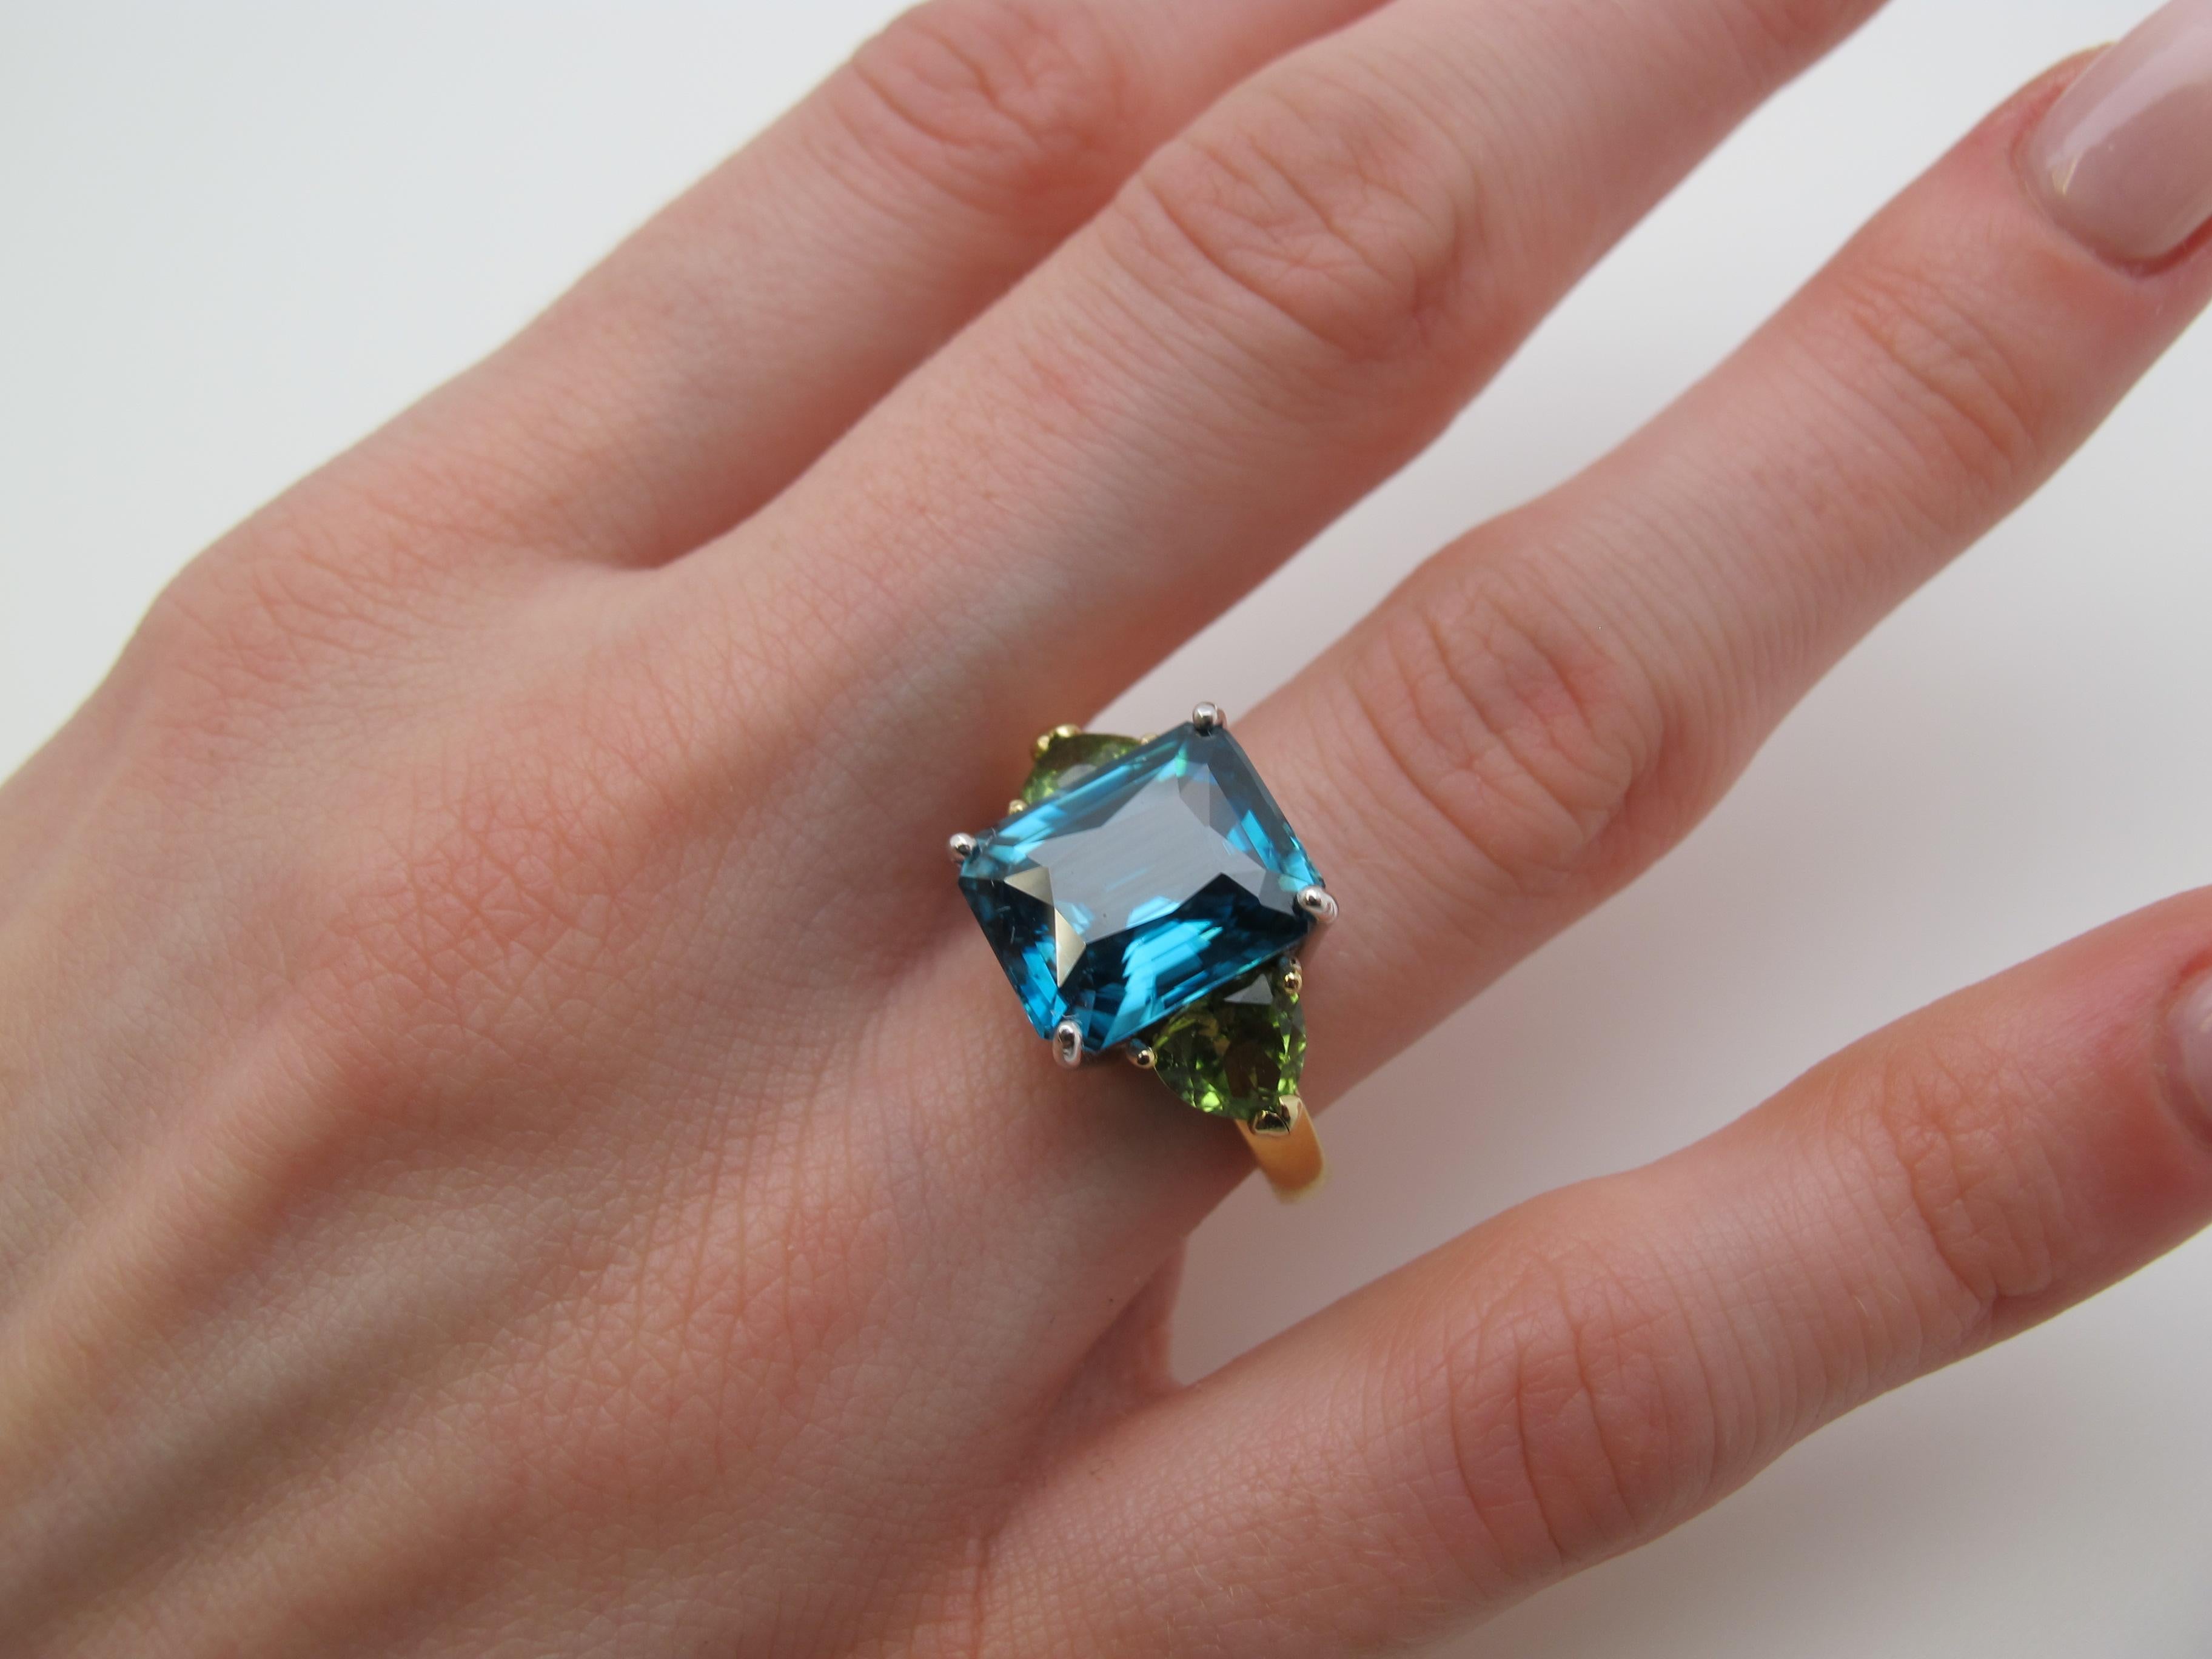 Neon turquoise blue (the color of Windex!) is the color of the beautiful, emerald-cut zircon featured in this ring. It is complemented by trillion-cut peridot side stones in a happy marriage of colors. All our stones are truly gems, possessing fine